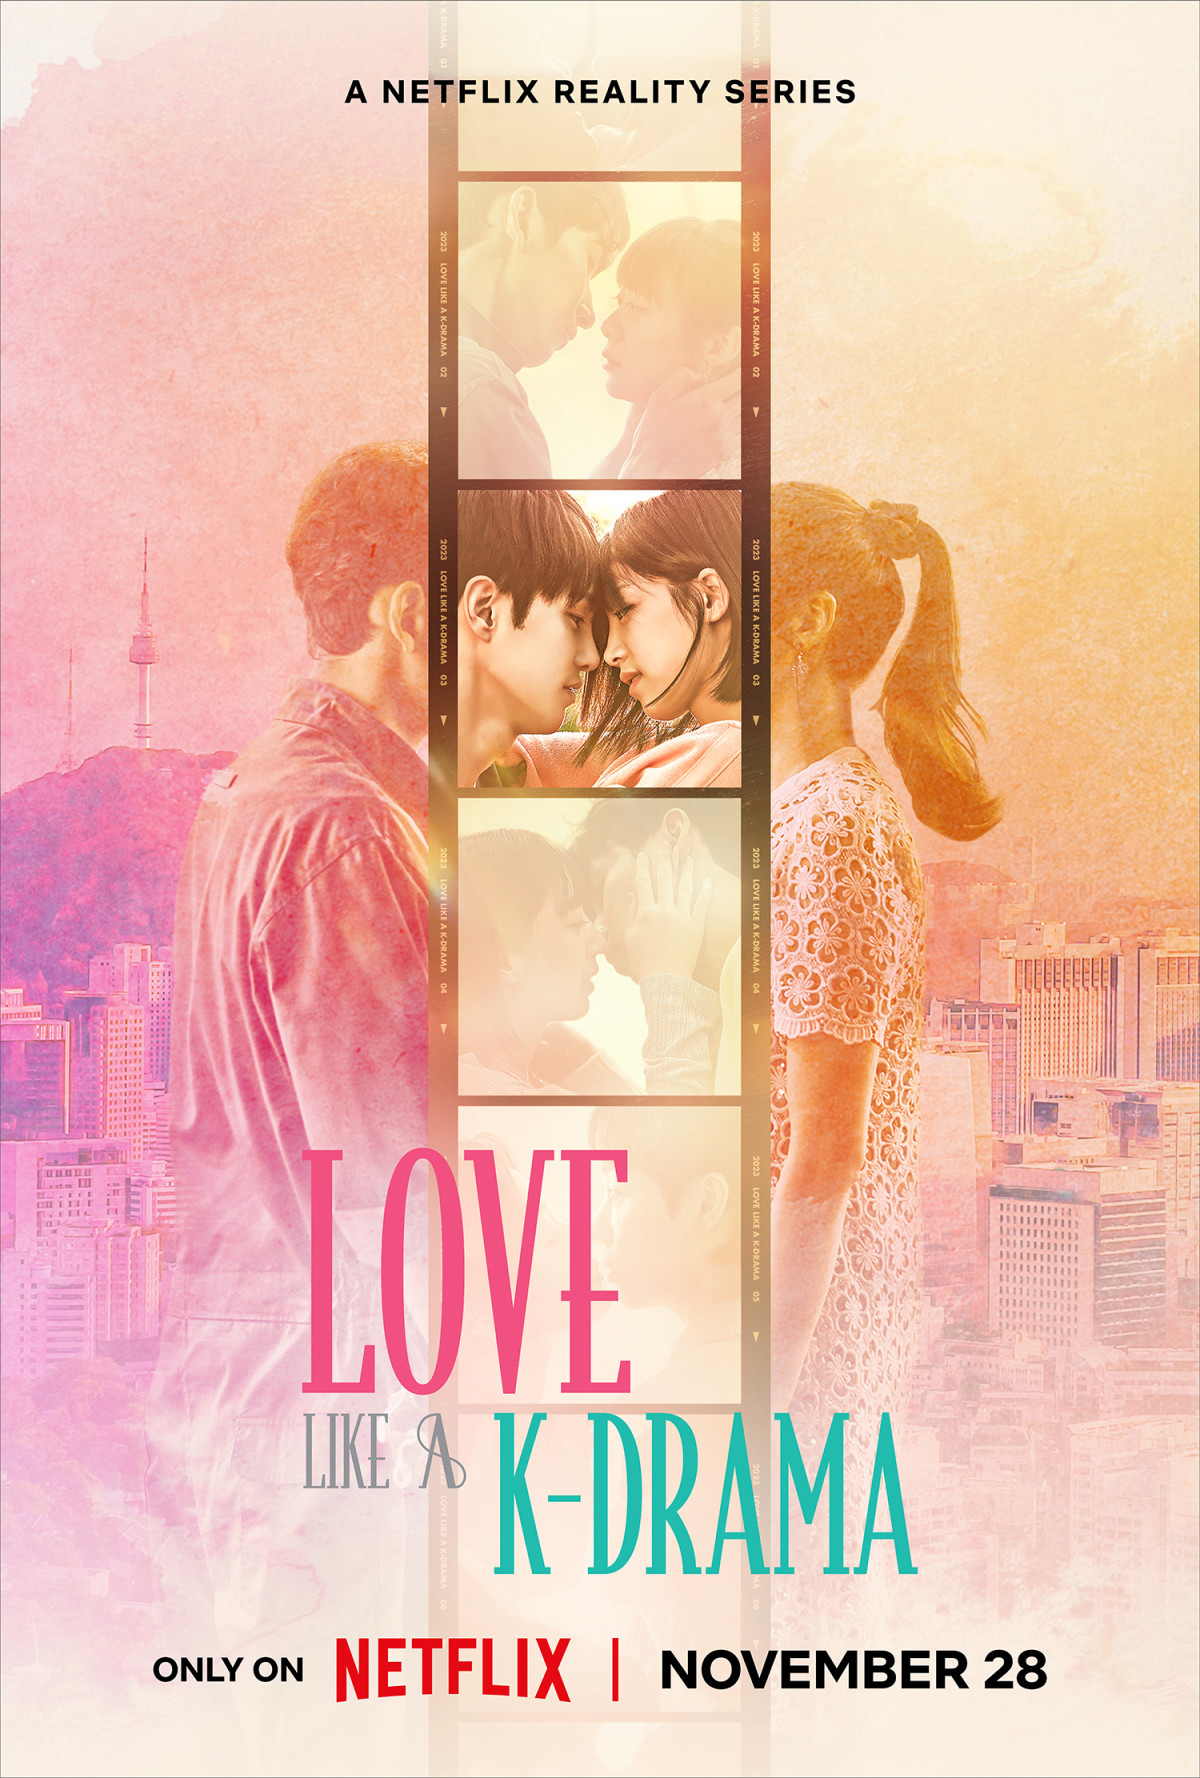 New Reality Dating Show 'Love Like a K-Drama' Takes Viewers on a